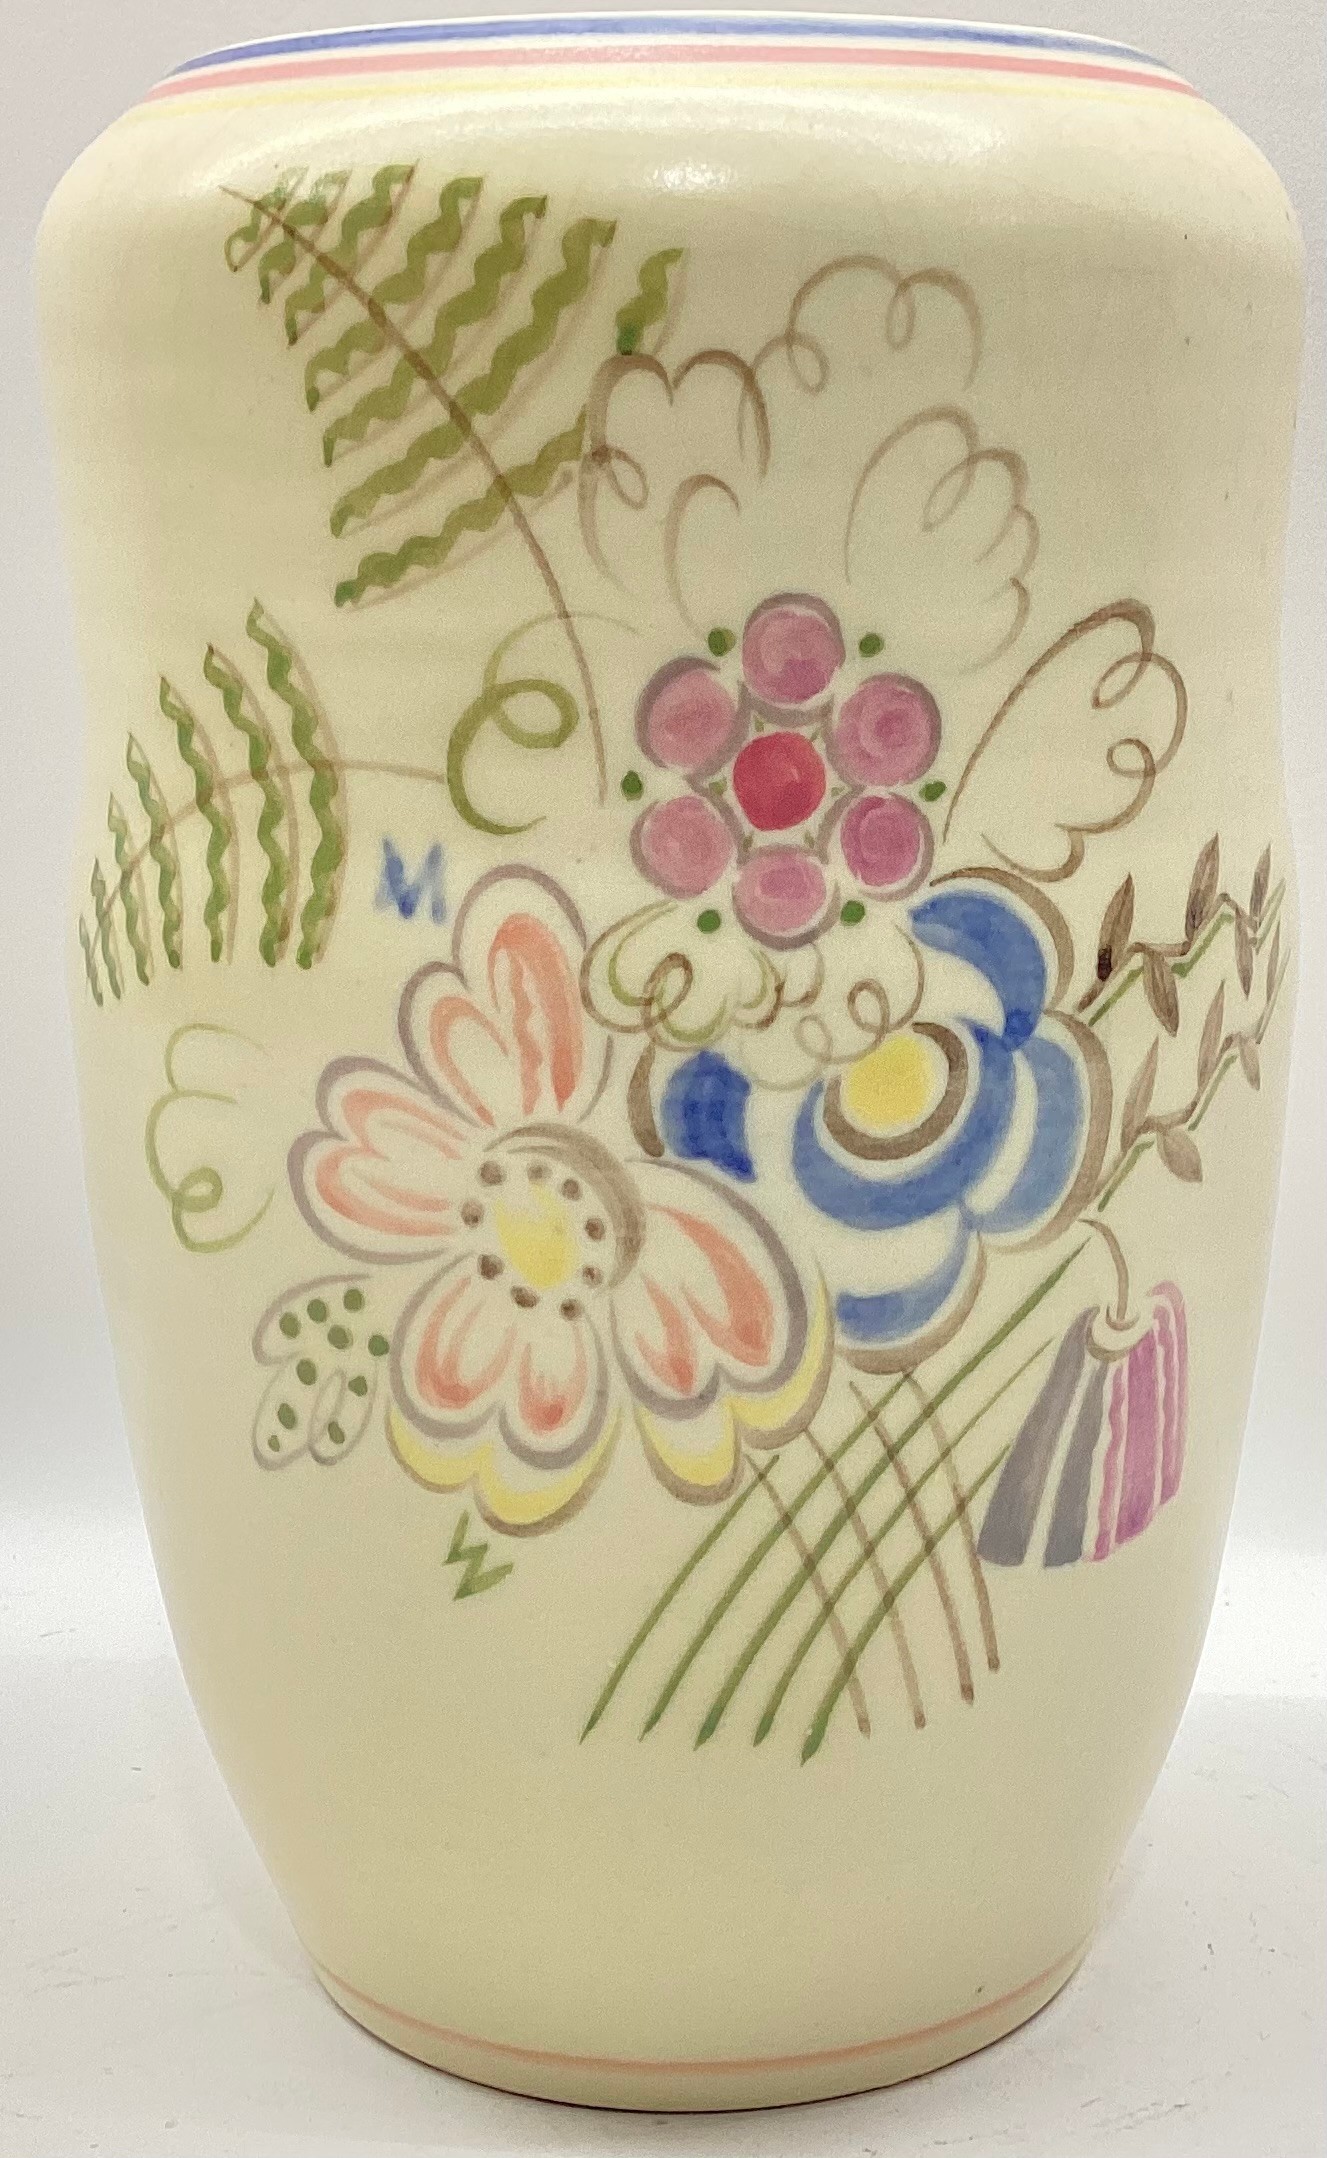 Poole Pottery shape 868 ES pattern vase decorated by Ruth Pavely 7.6" high.